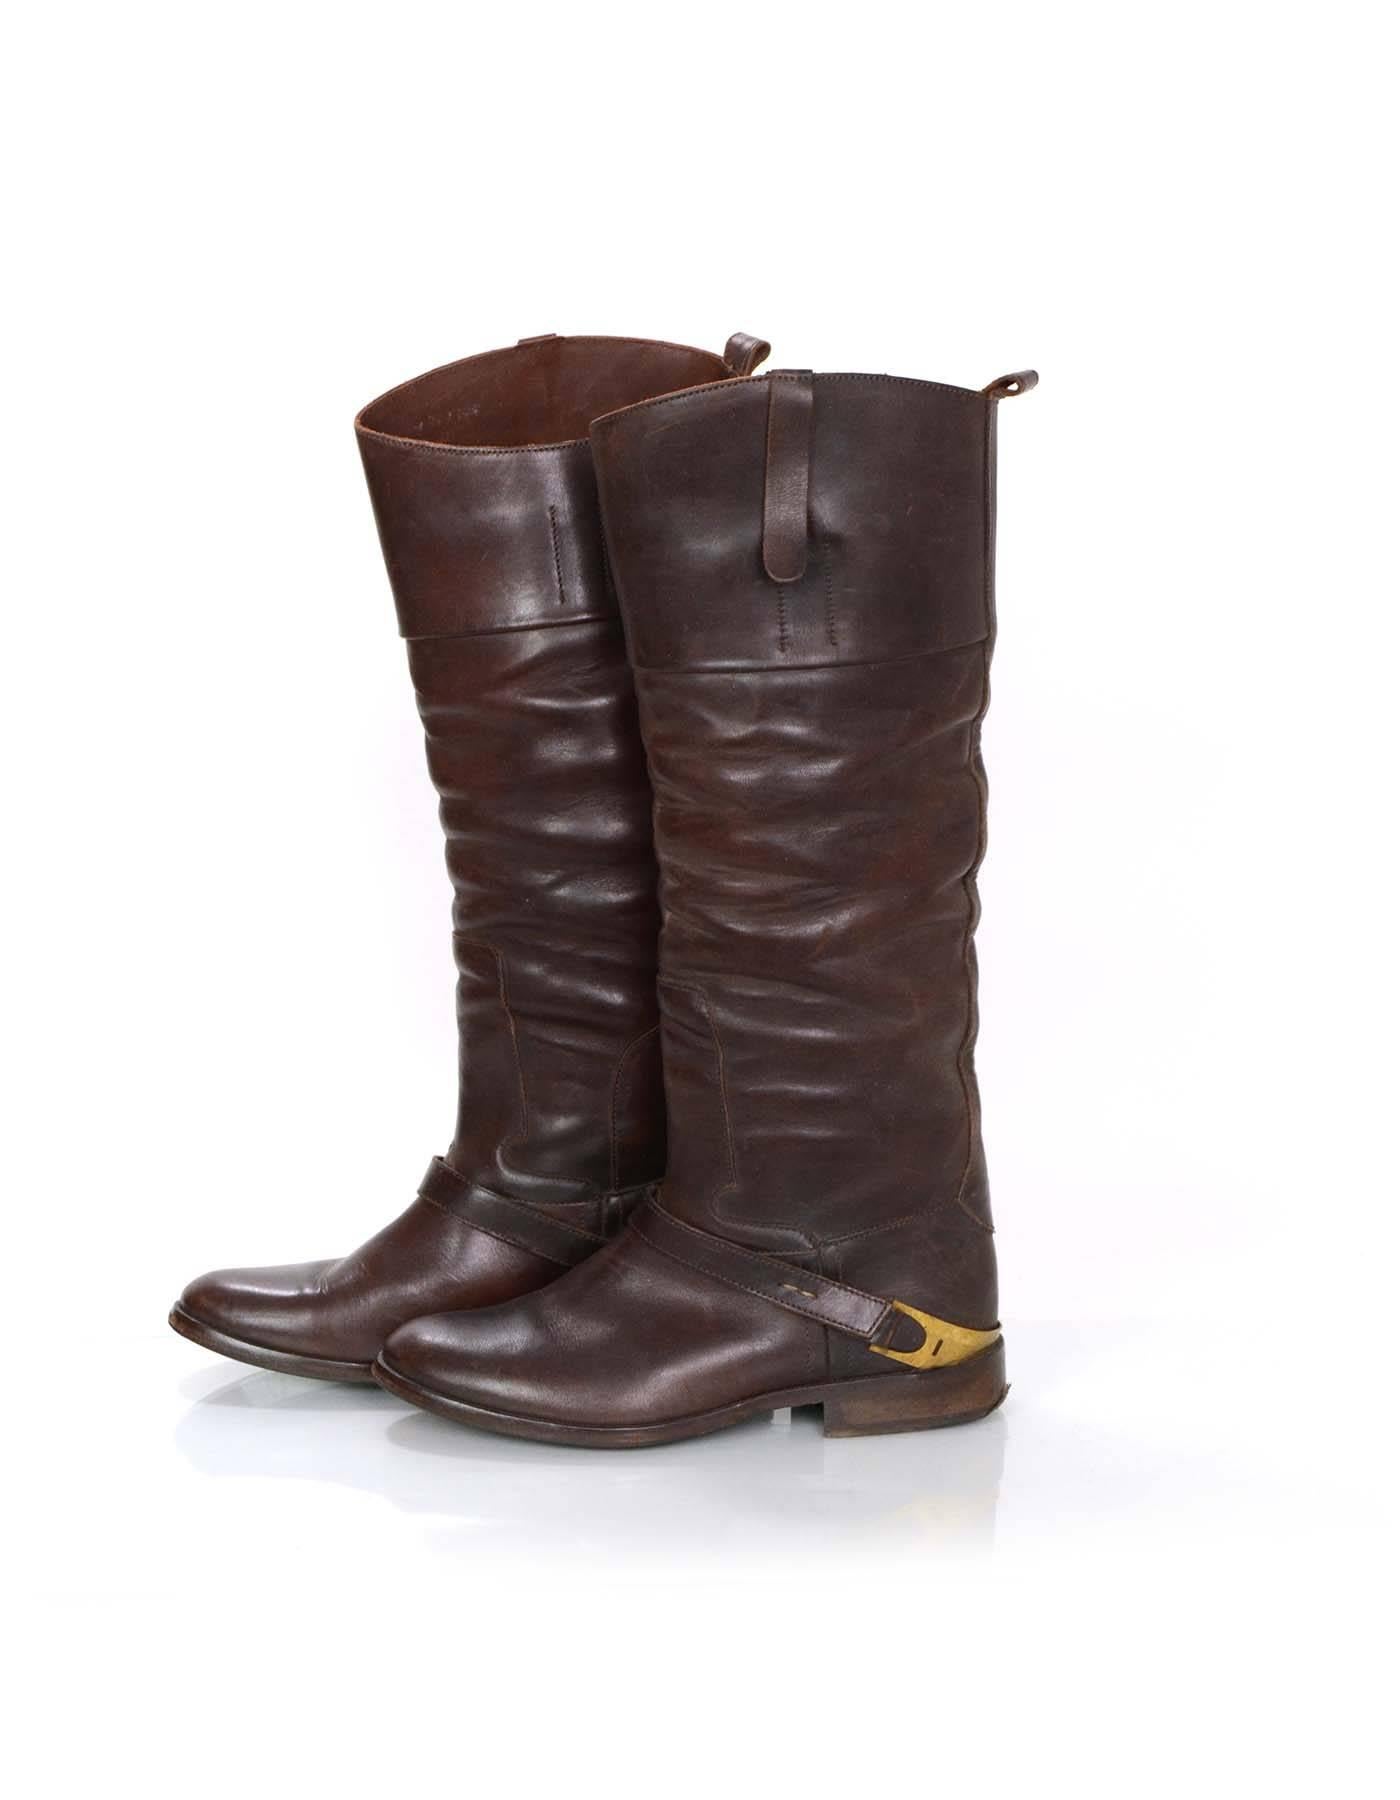 Golden Goose Brown Distressed Leather Boots Sz 36
Features distressed look

Made In: Italy
Color: Brown
Materials: Leather
Closure/Opening: Pull on
Retail Price: $1,215 + tax
Sole Stamp: Vero Cuou Made in Italy 36
Overall Condition: